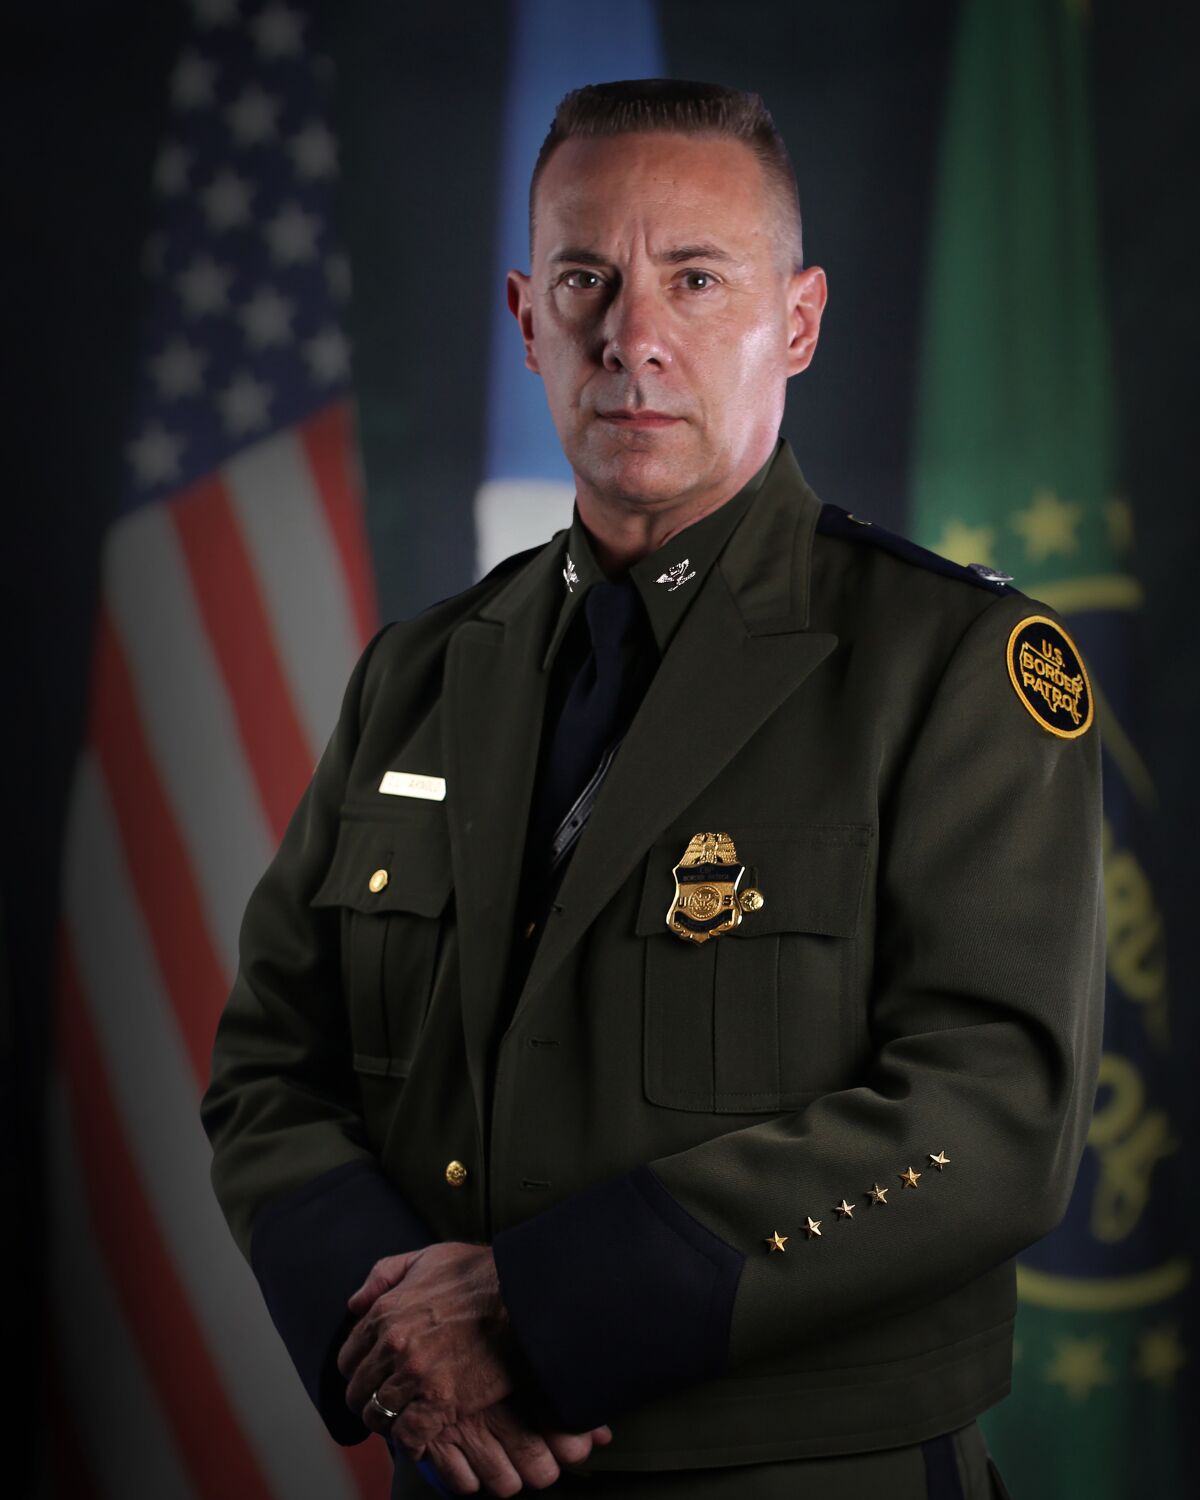 Today, Arnold is an assistant chief with the U.S. Border Patrol.